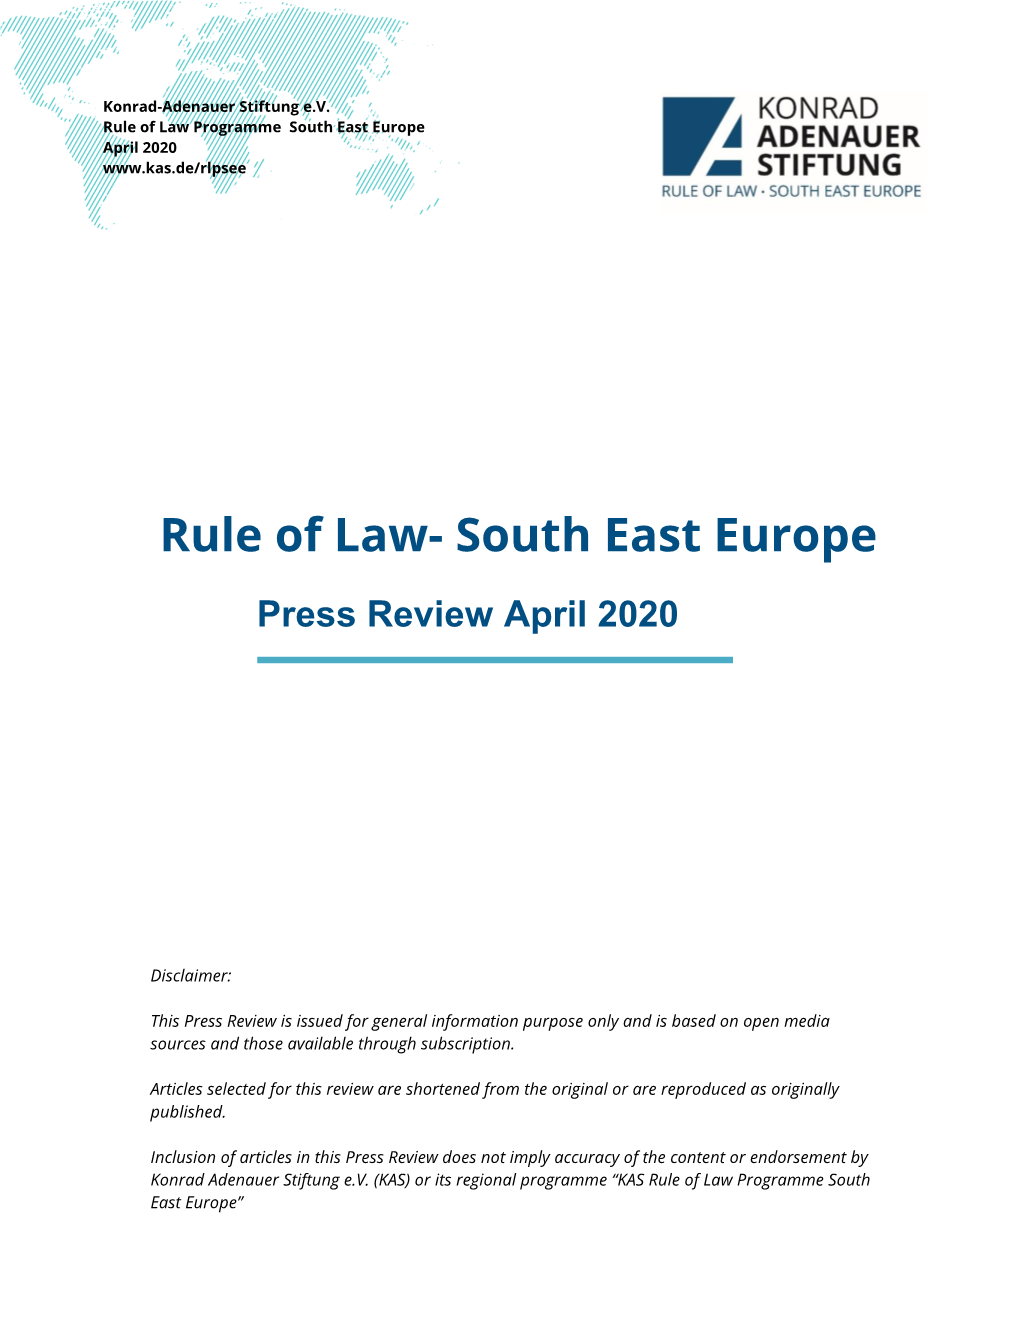 Rule of Law Programme South East Europe April 2020